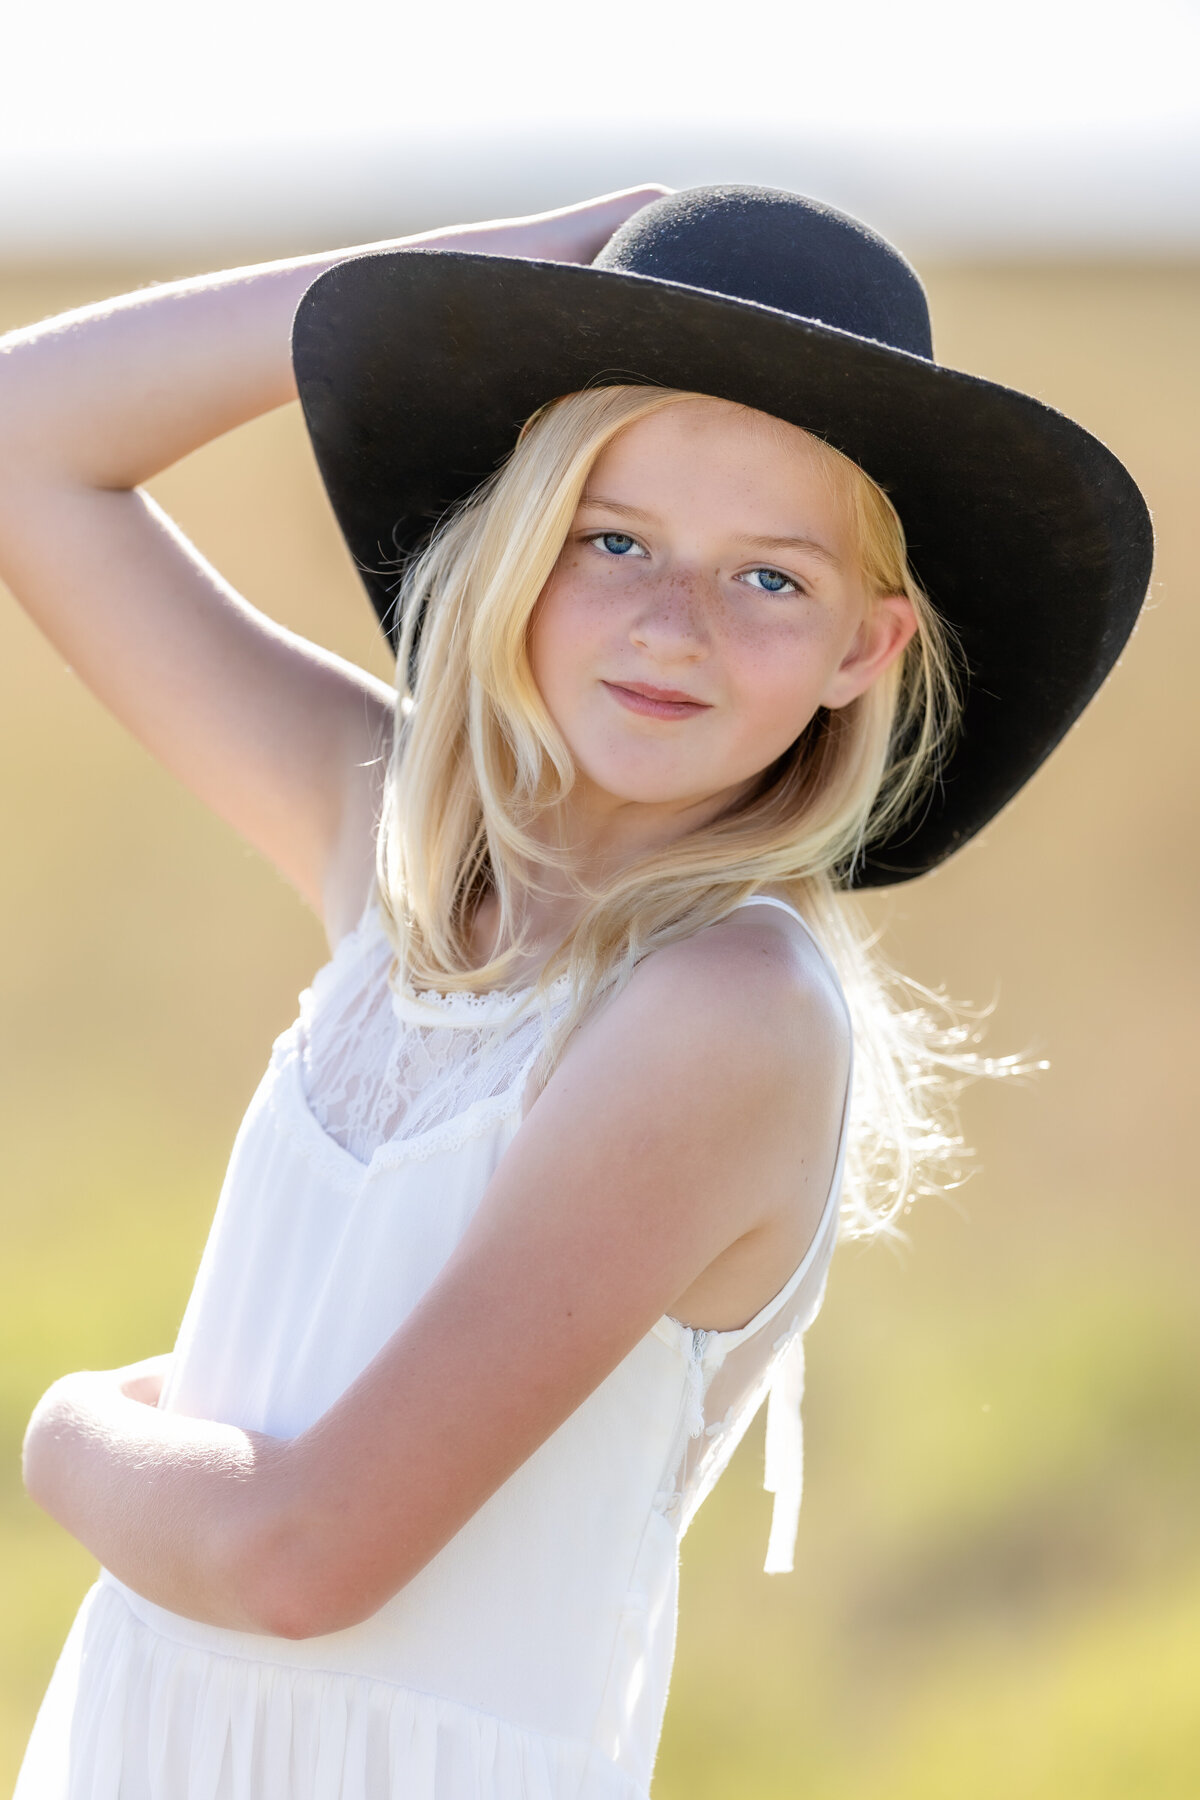 Young girl is wearing a white sleeveless dress with a black cowboy hat and is looking at the camera